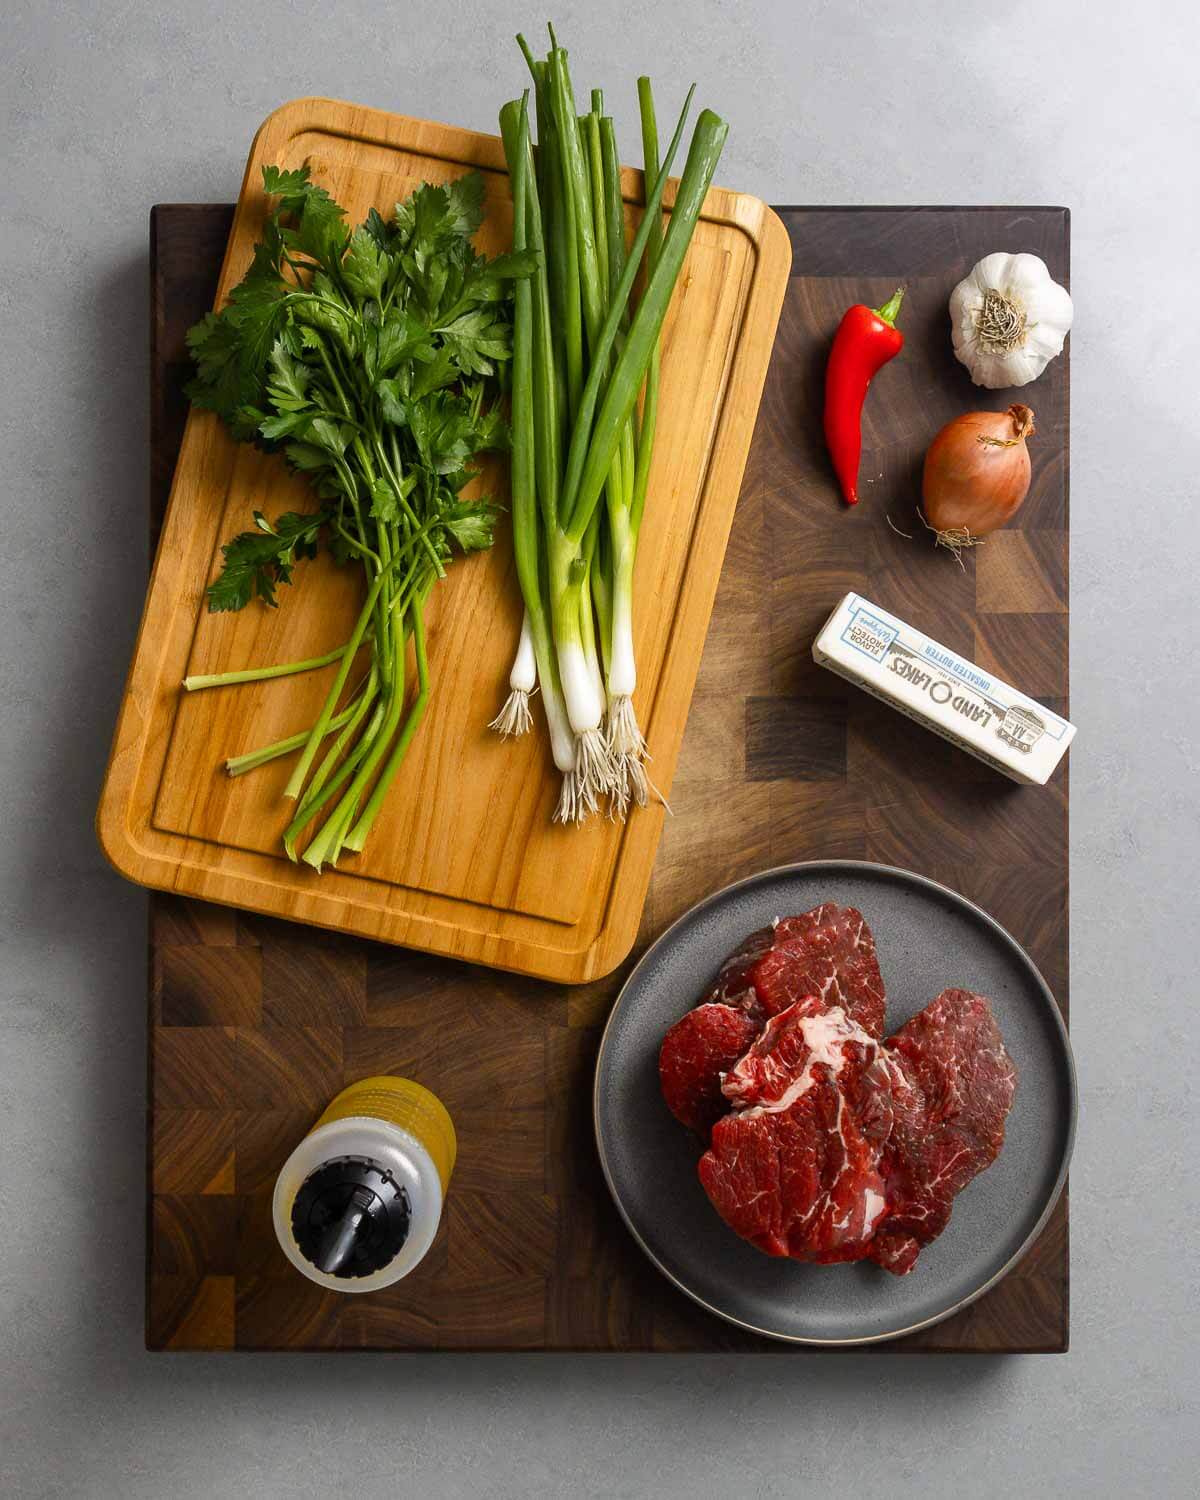 Ingredients shown: parsley, green onions, chili pepper, garlic, shallot, avocado oil, and filet mignon.